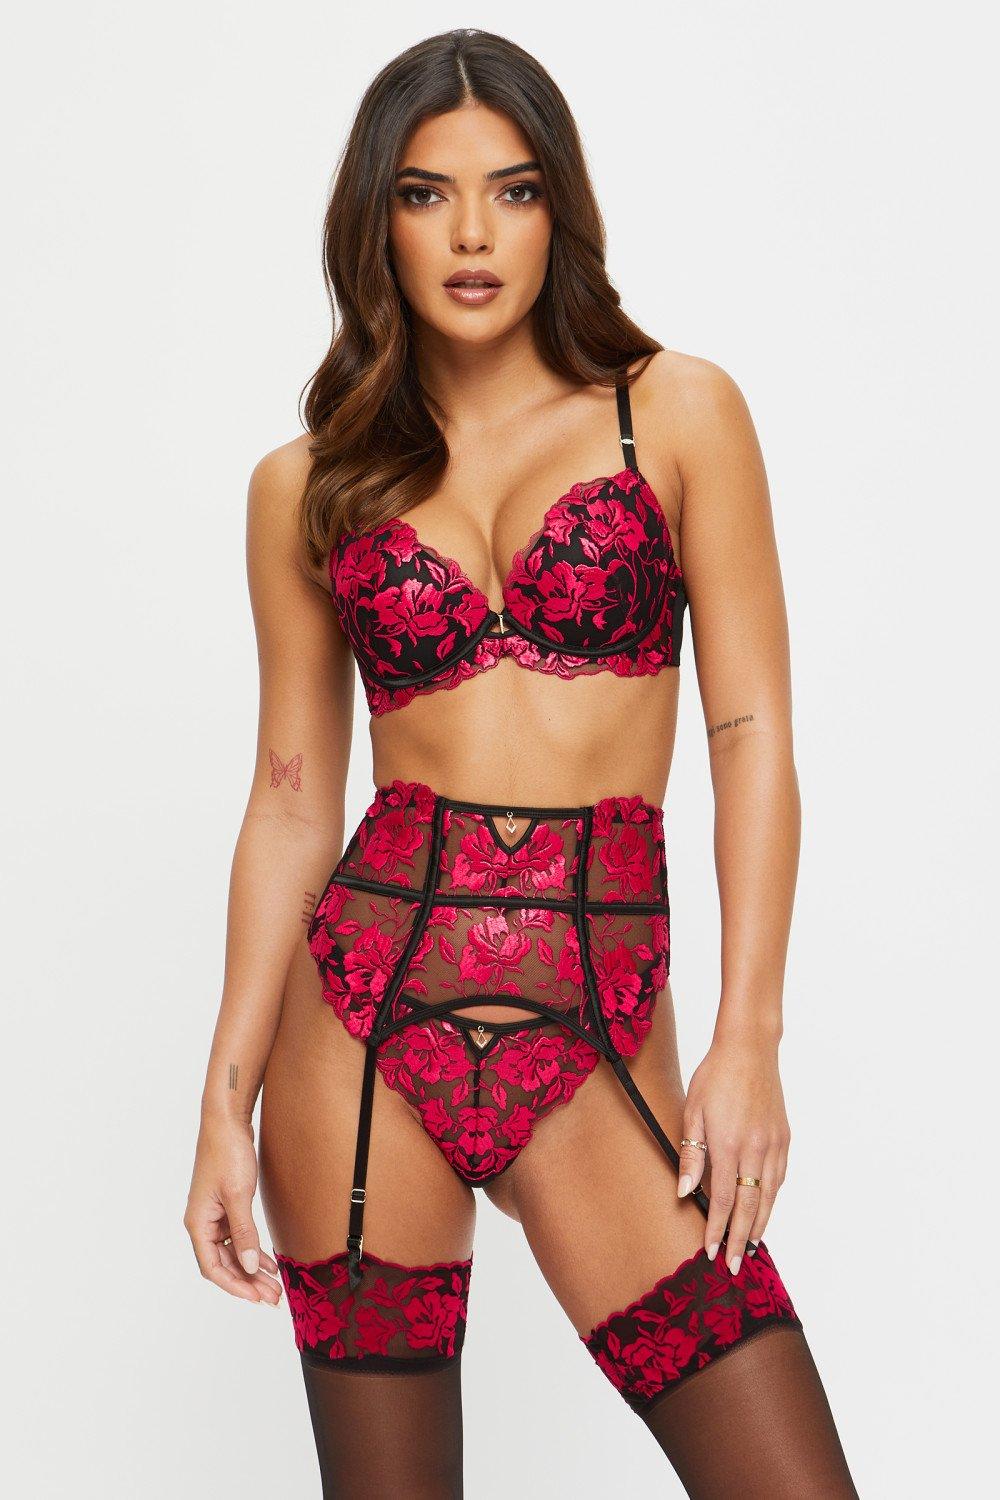 Ann Summers ** Hero ** Non Padded Red & Black Plunge Bra 32 - 44 A - H Cup